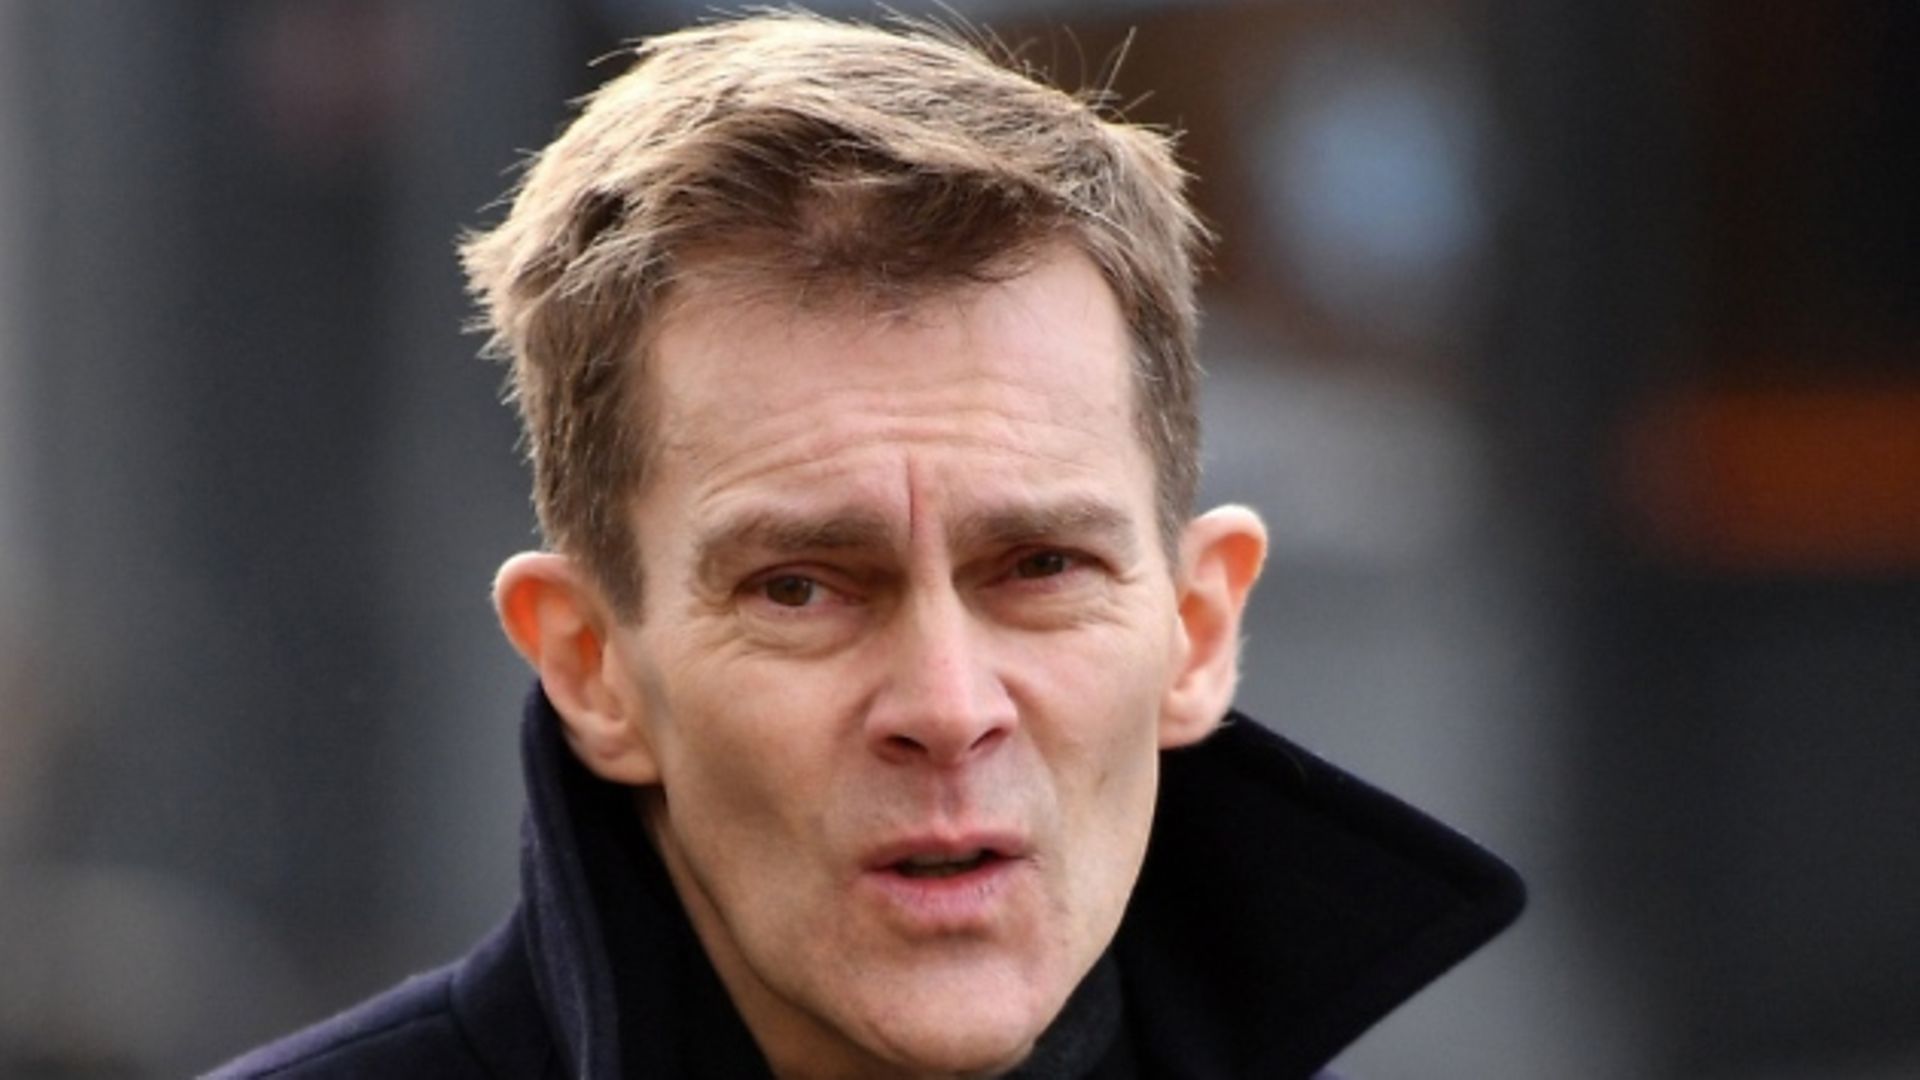 Former Labour Strategy and Communications Director Seumas Milne. (Photo by Leon Neal/Getty Images) - Credit: Leon Neal/Getty Images